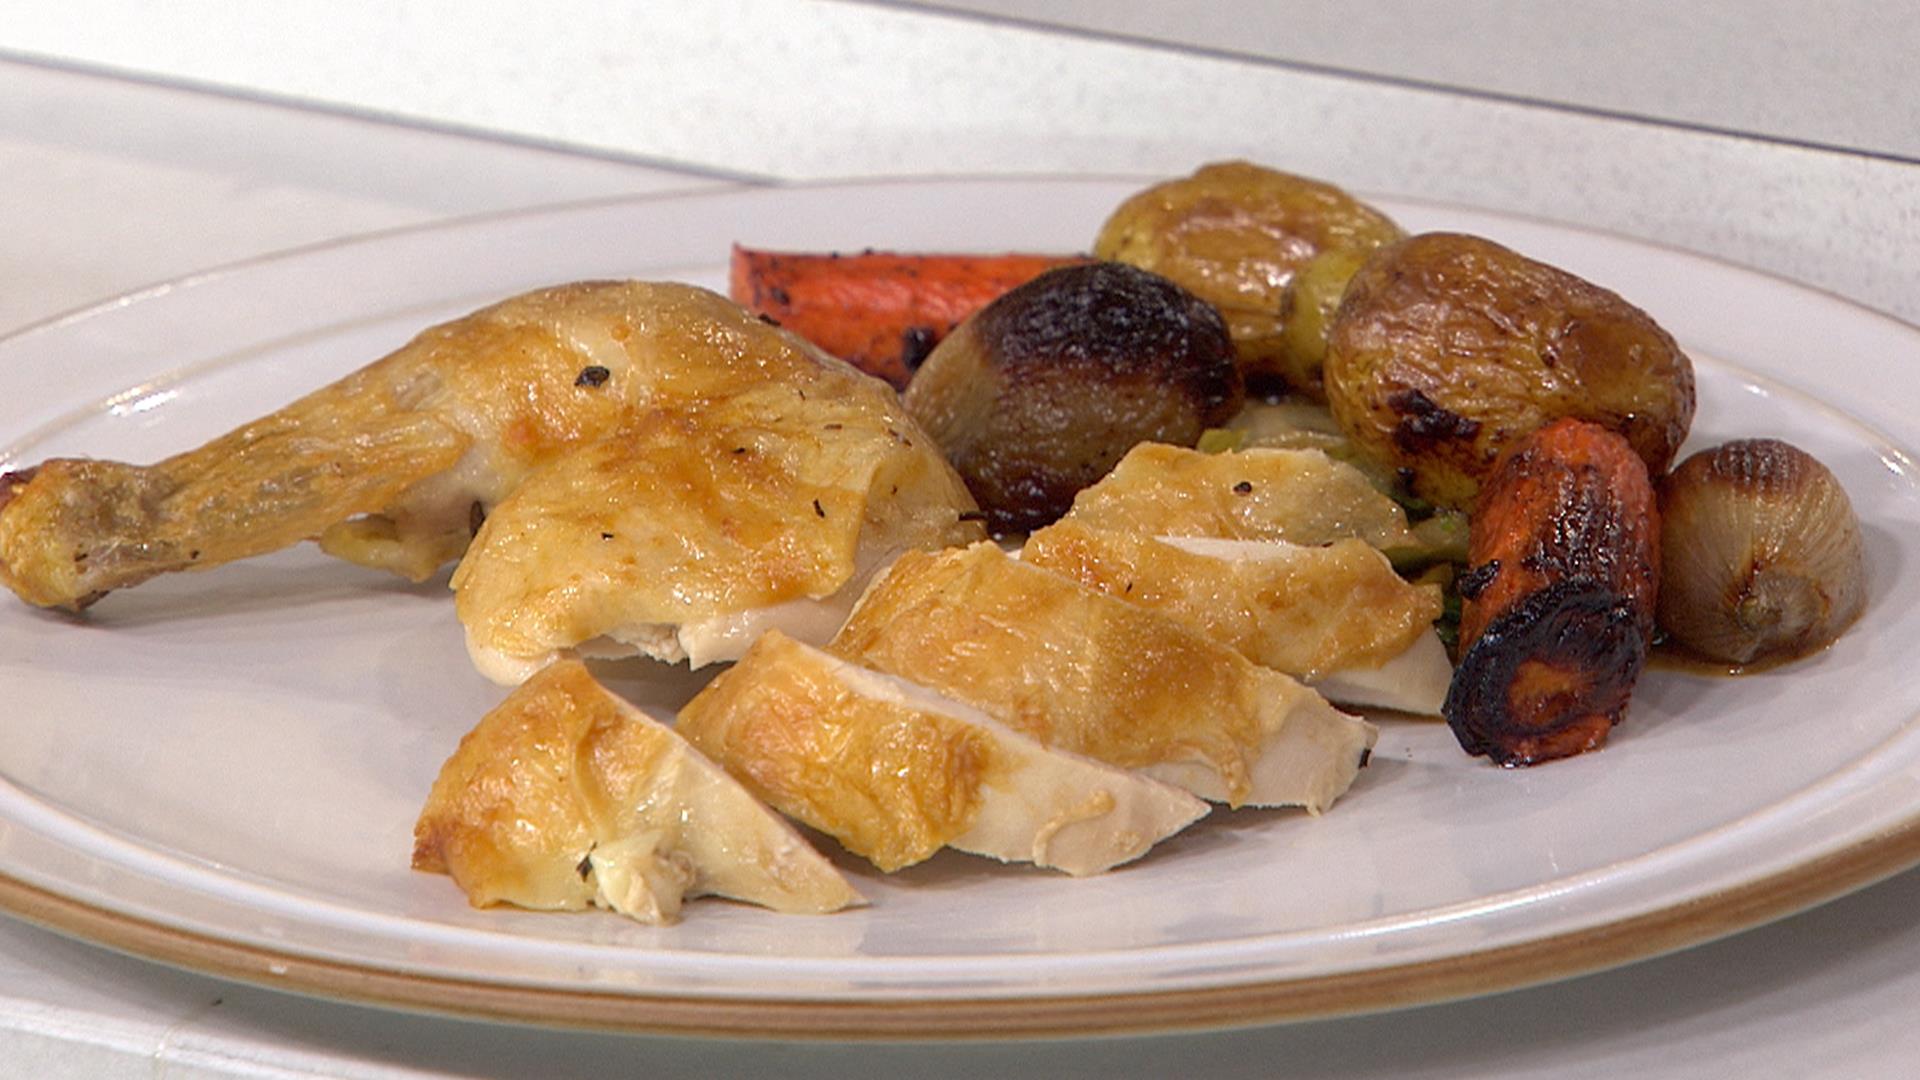 Roasted chicken with potatoes, vegetables: Try this deliciously seasoned meal